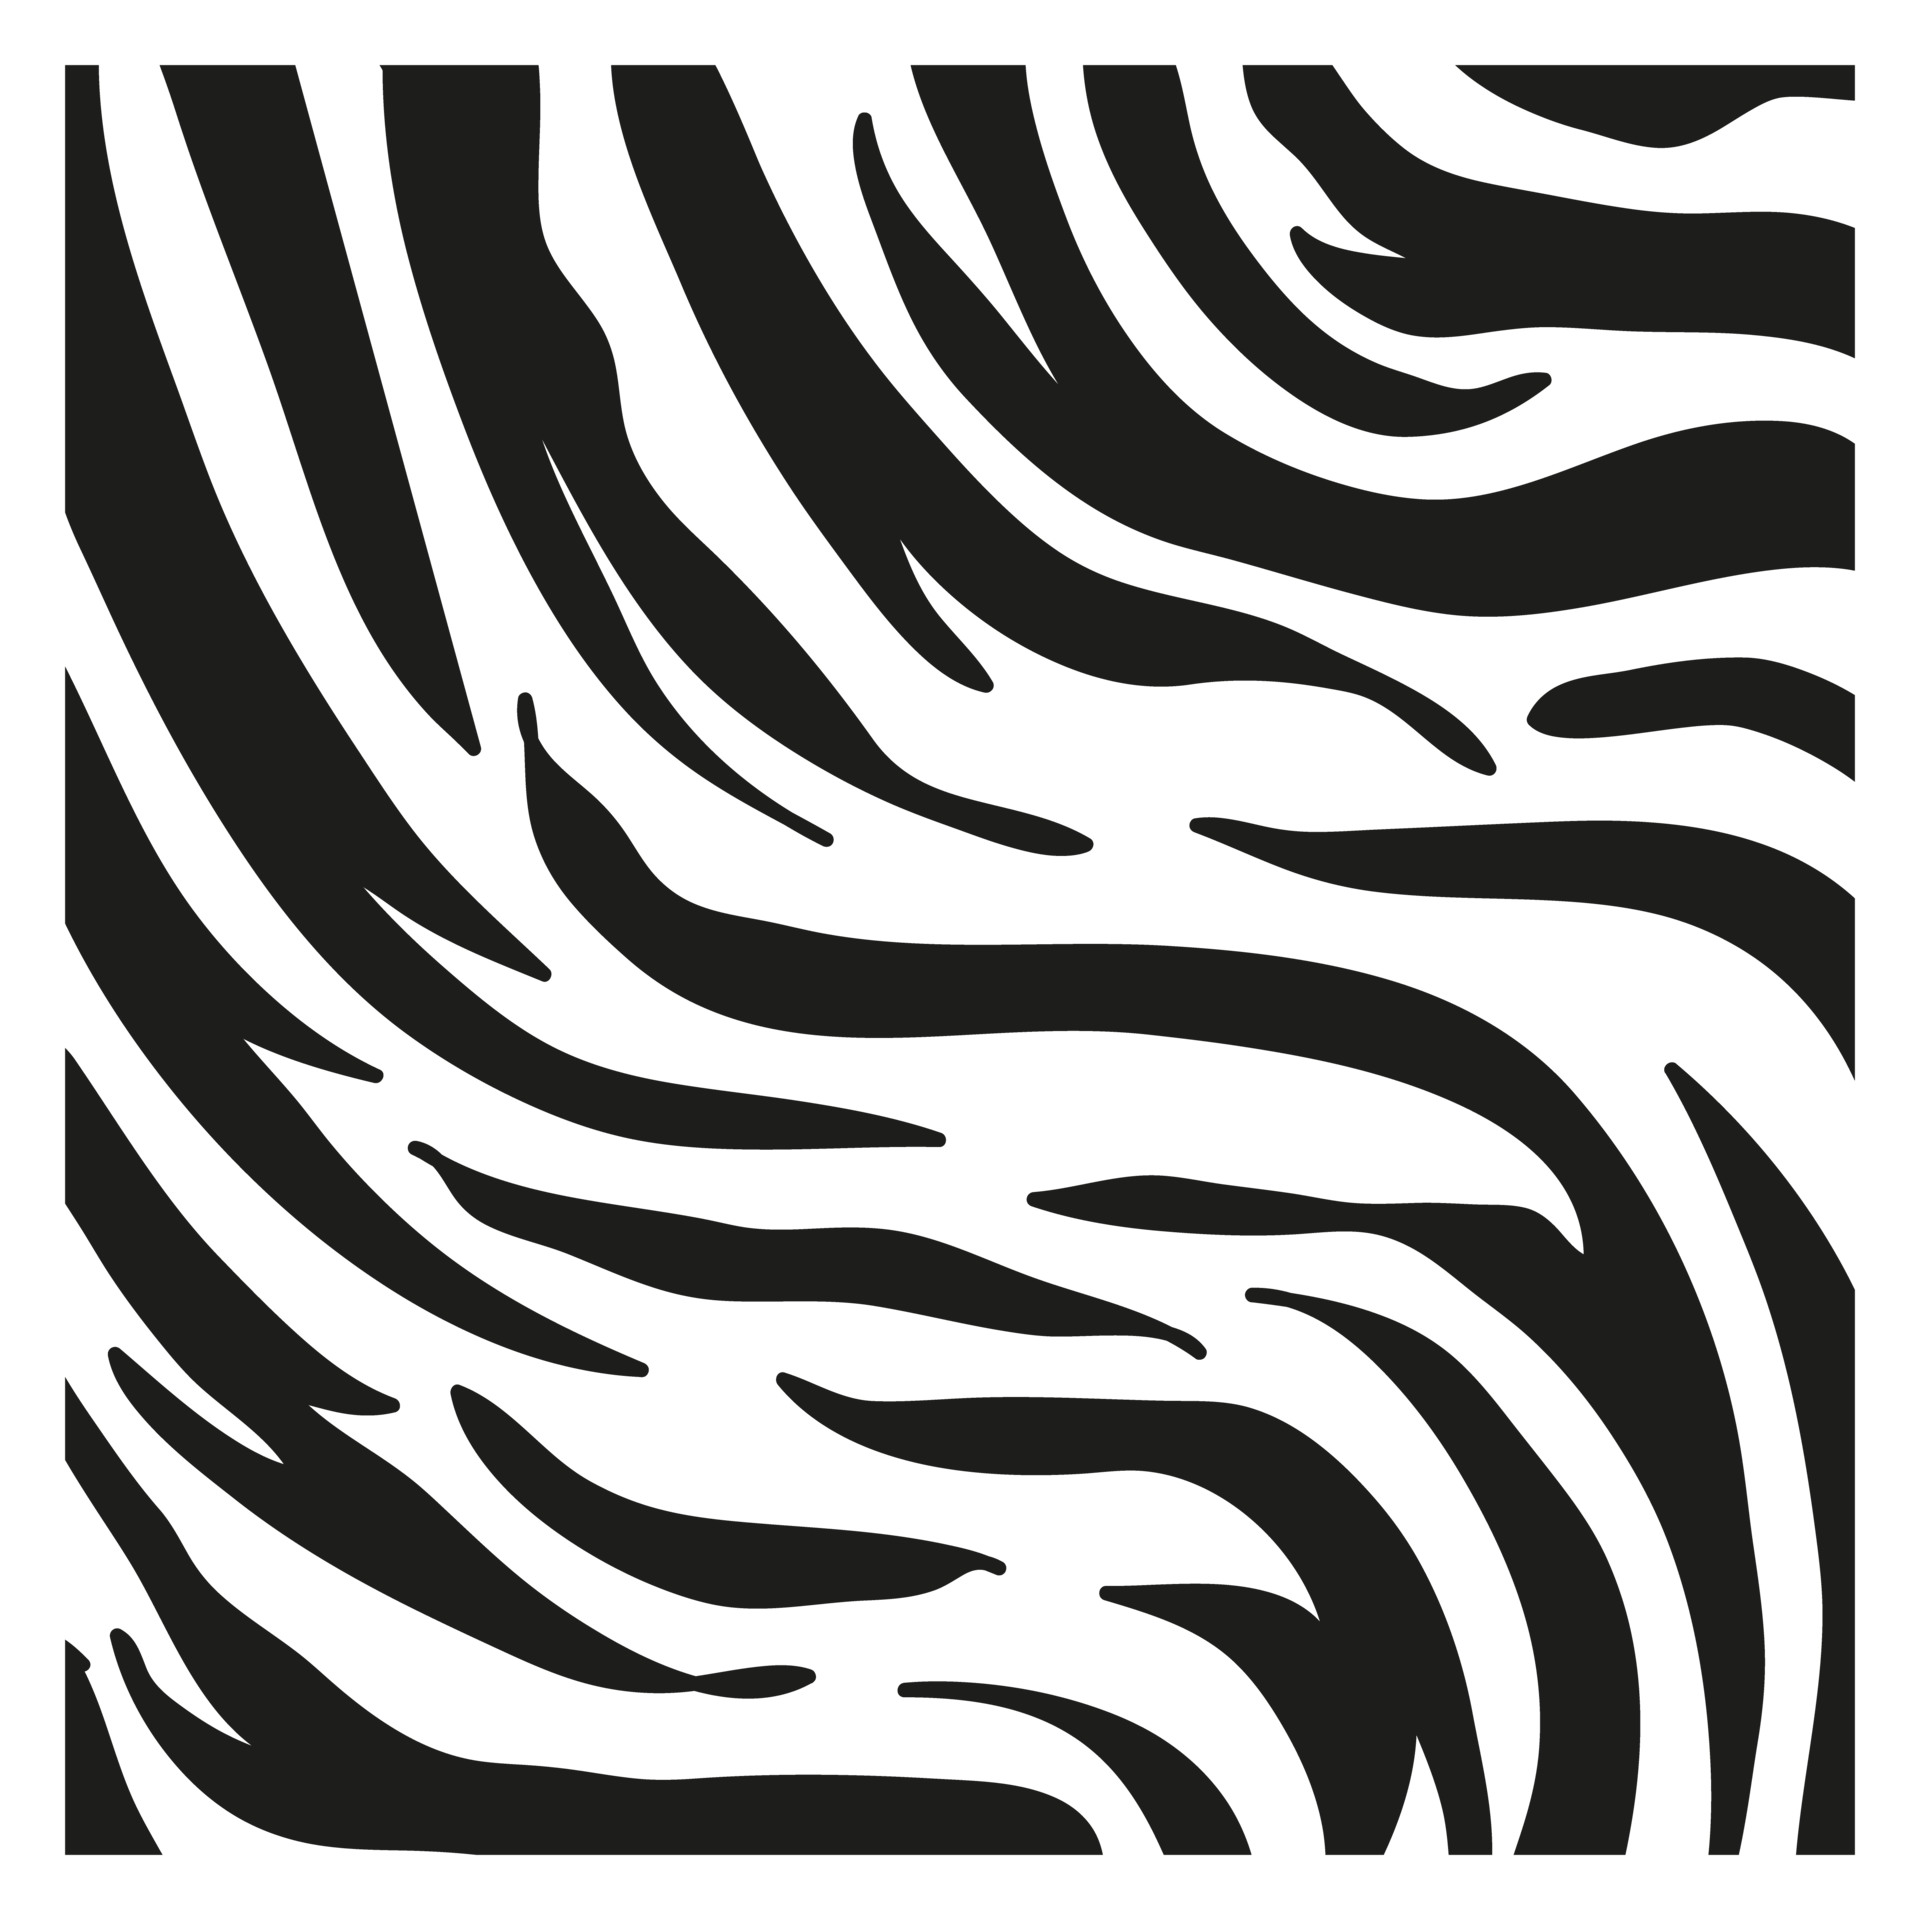 https://static.vecteezy.com/system/resources/previews/014/098/885/original/tiger-stripes-background-for-decorating-the-background-of-wild-animals-png.png